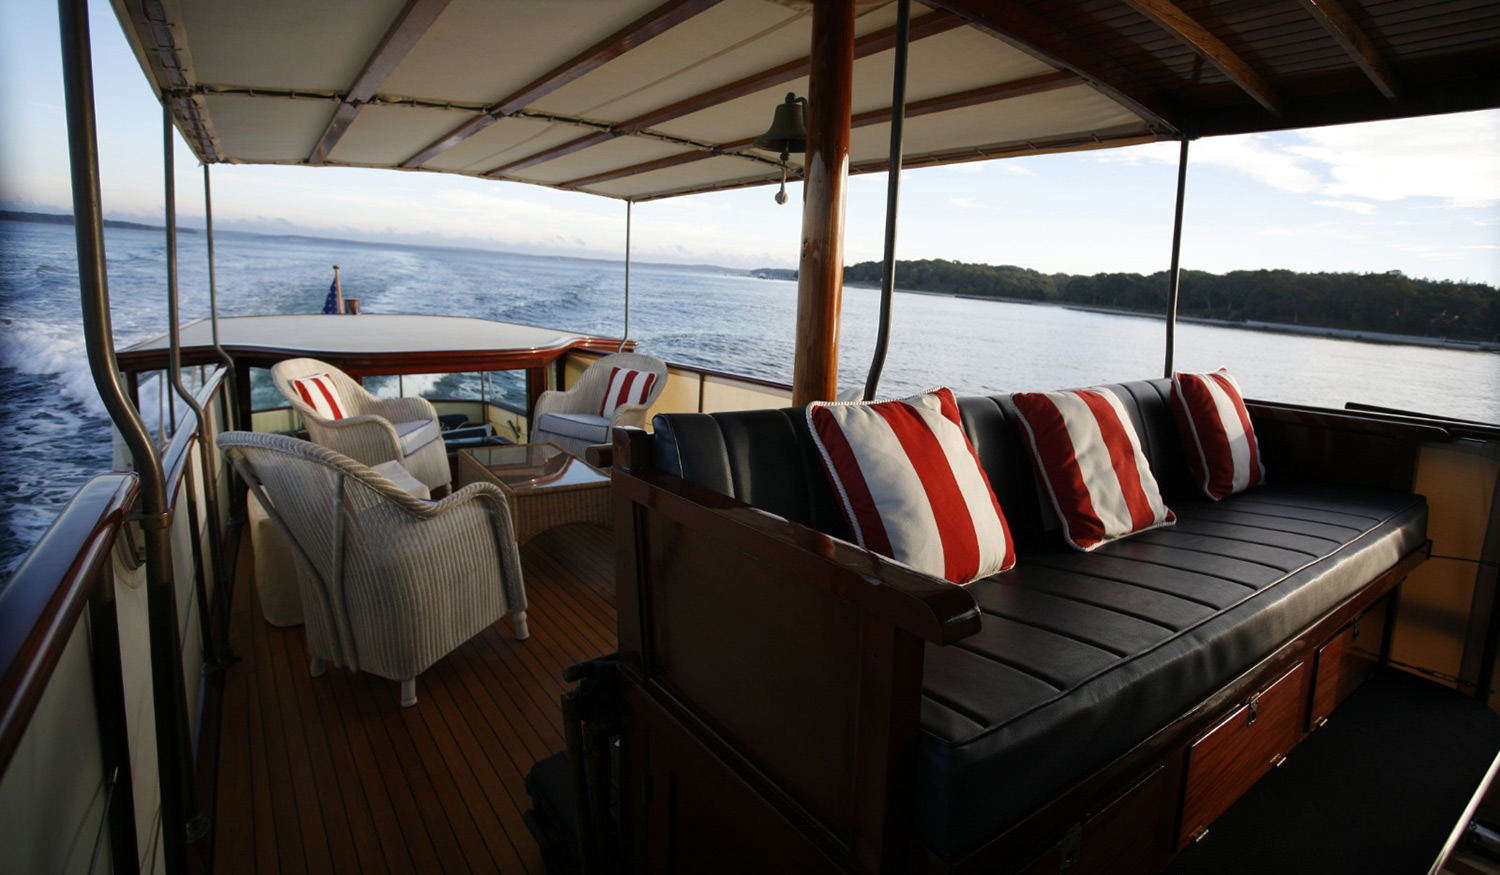 Eldredge-McInnis commuter yacht Scout seating